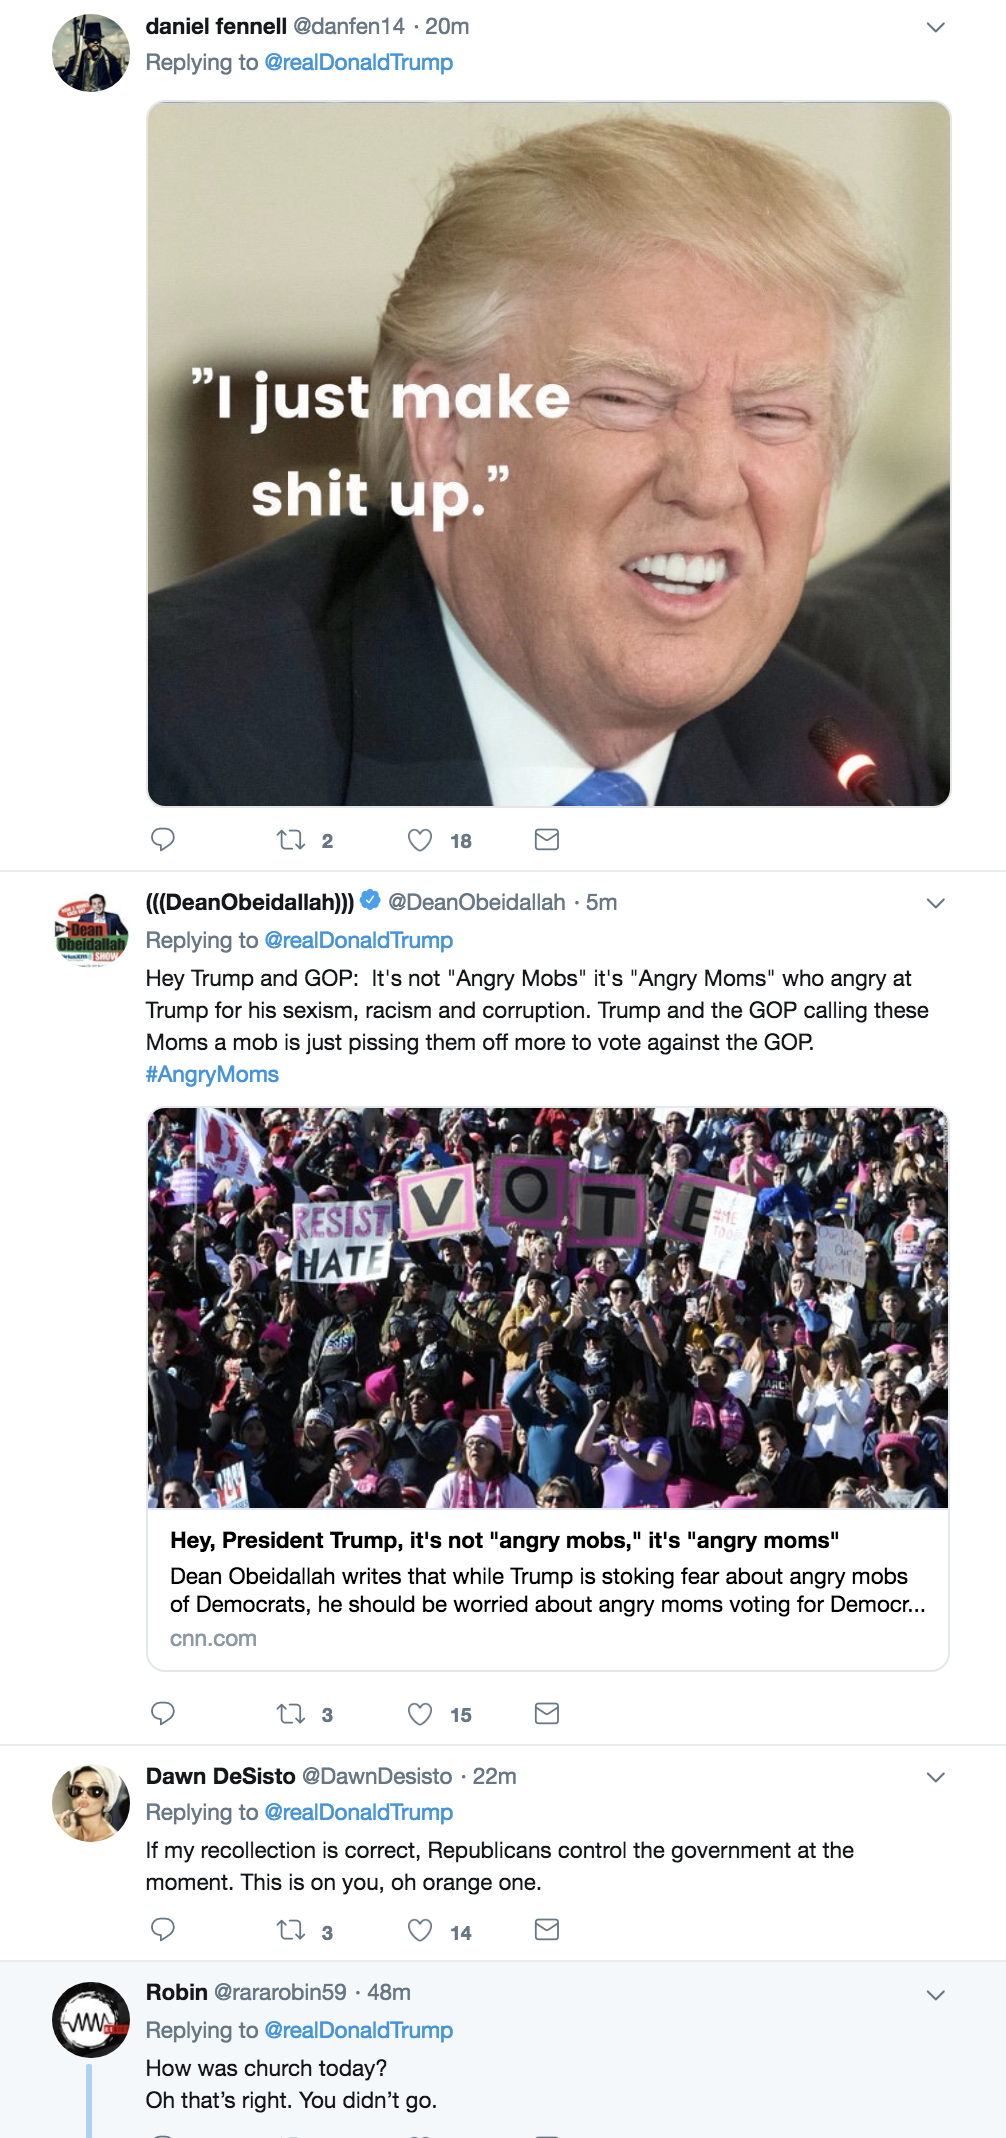 Screen-Shot-2018-10-21-at-3.57.07-PM Trump Explodes Into Sunday Afternoon Multi-Tweet Freak Out (IMAGES) Civil Rights Corruption Donald Trump Economy Election 2018 Politics Top Stories 